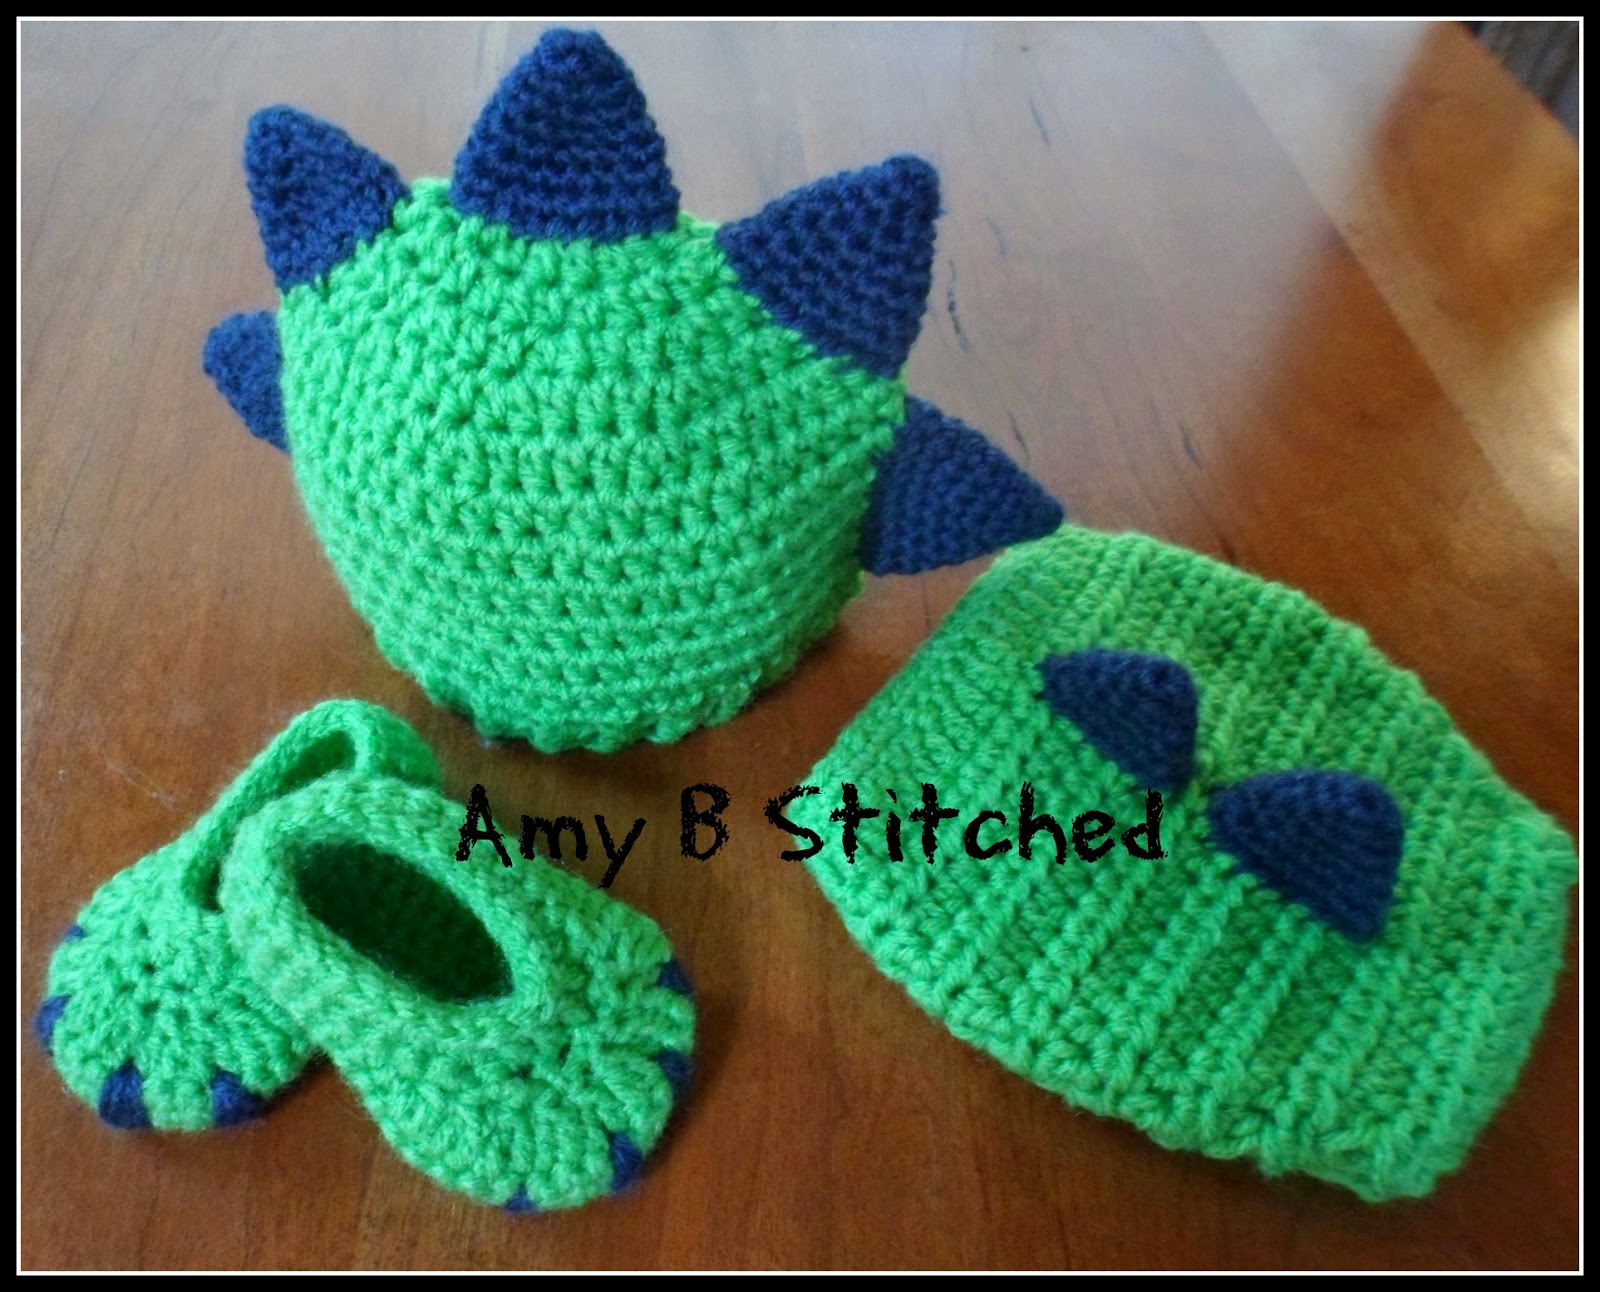 Crochet Baby Hat And Diaper Cover Pattern A Stitch At A Time For Amy B Stitched Newborn Dinosaur Ba Hat And